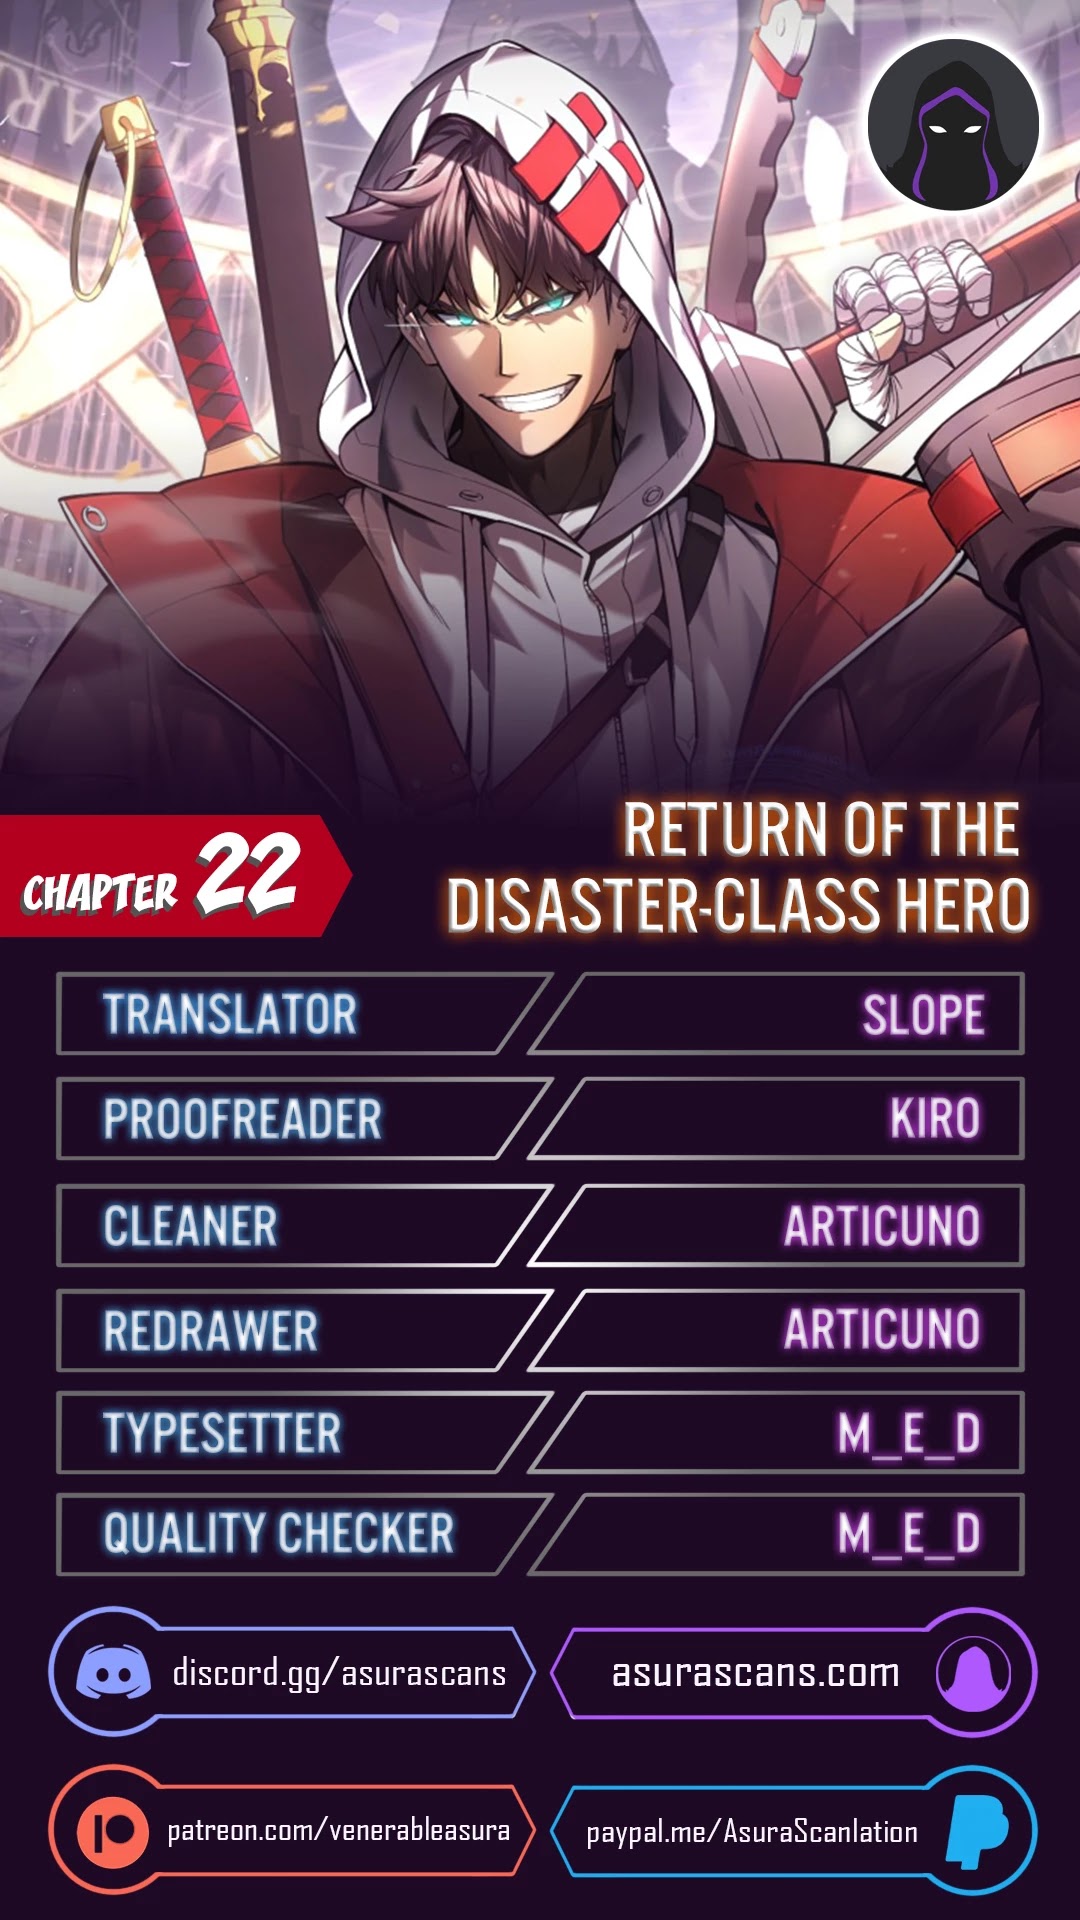 The Return Of The Disaster-Class Hero - Page 1